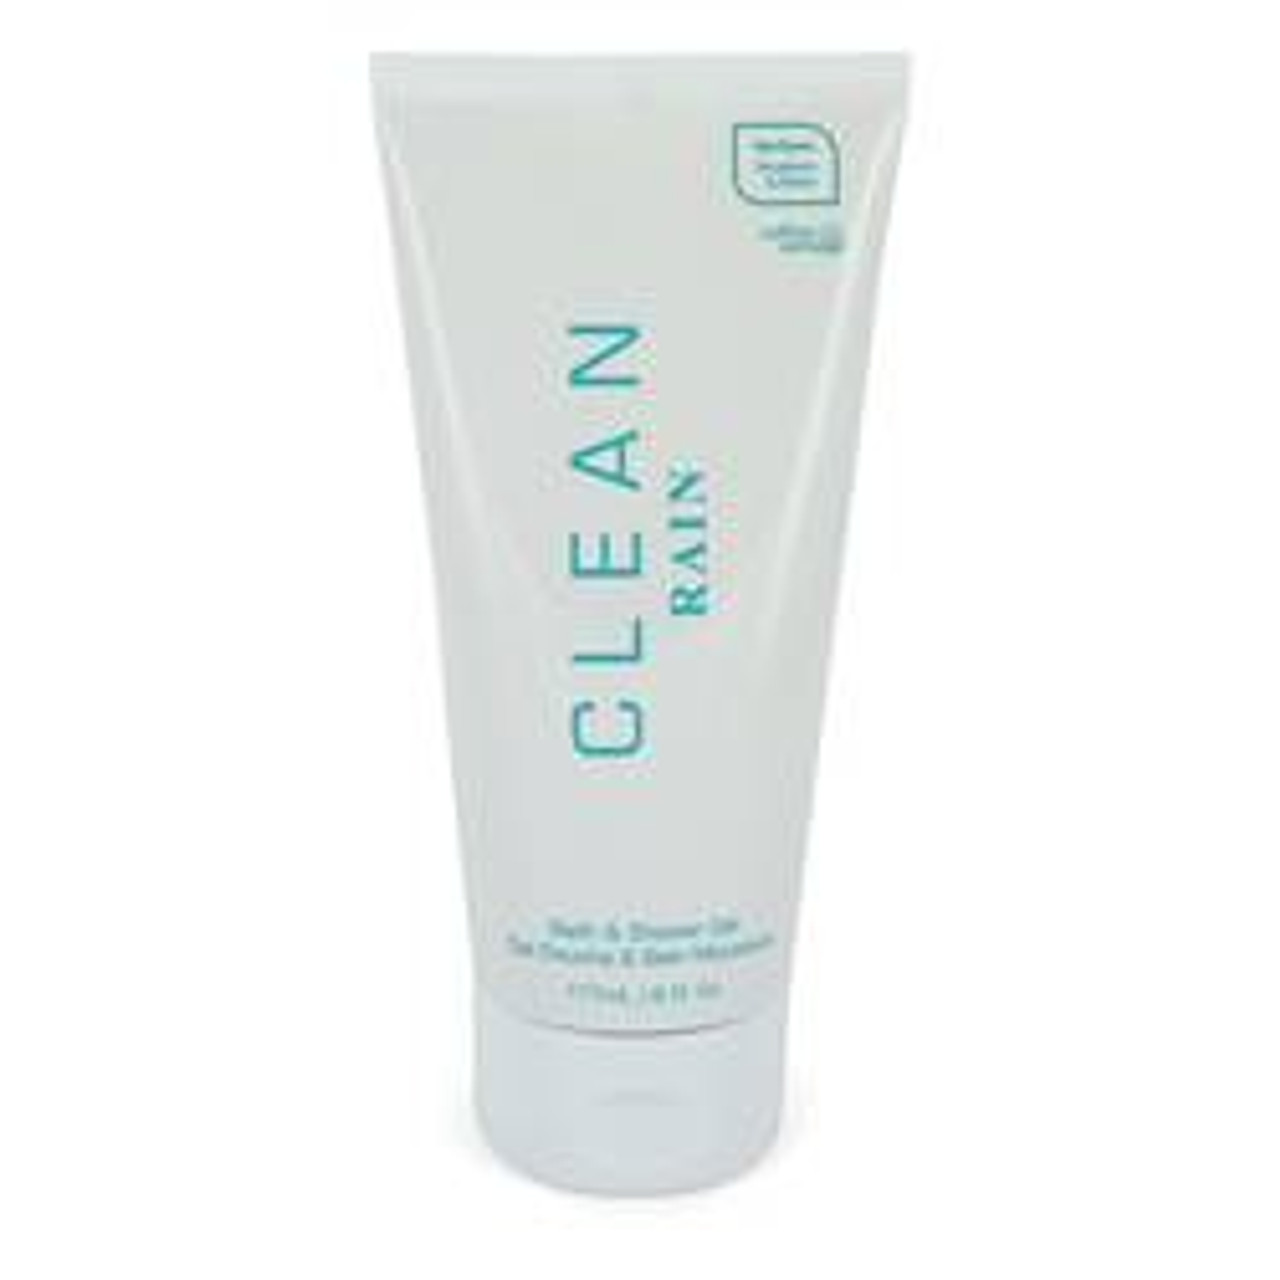 Clean Rain Perfume By Clean Shower Gel 6 oz for Women - [From 31.00 - Choose pk Qty ] - *Ships from Miami